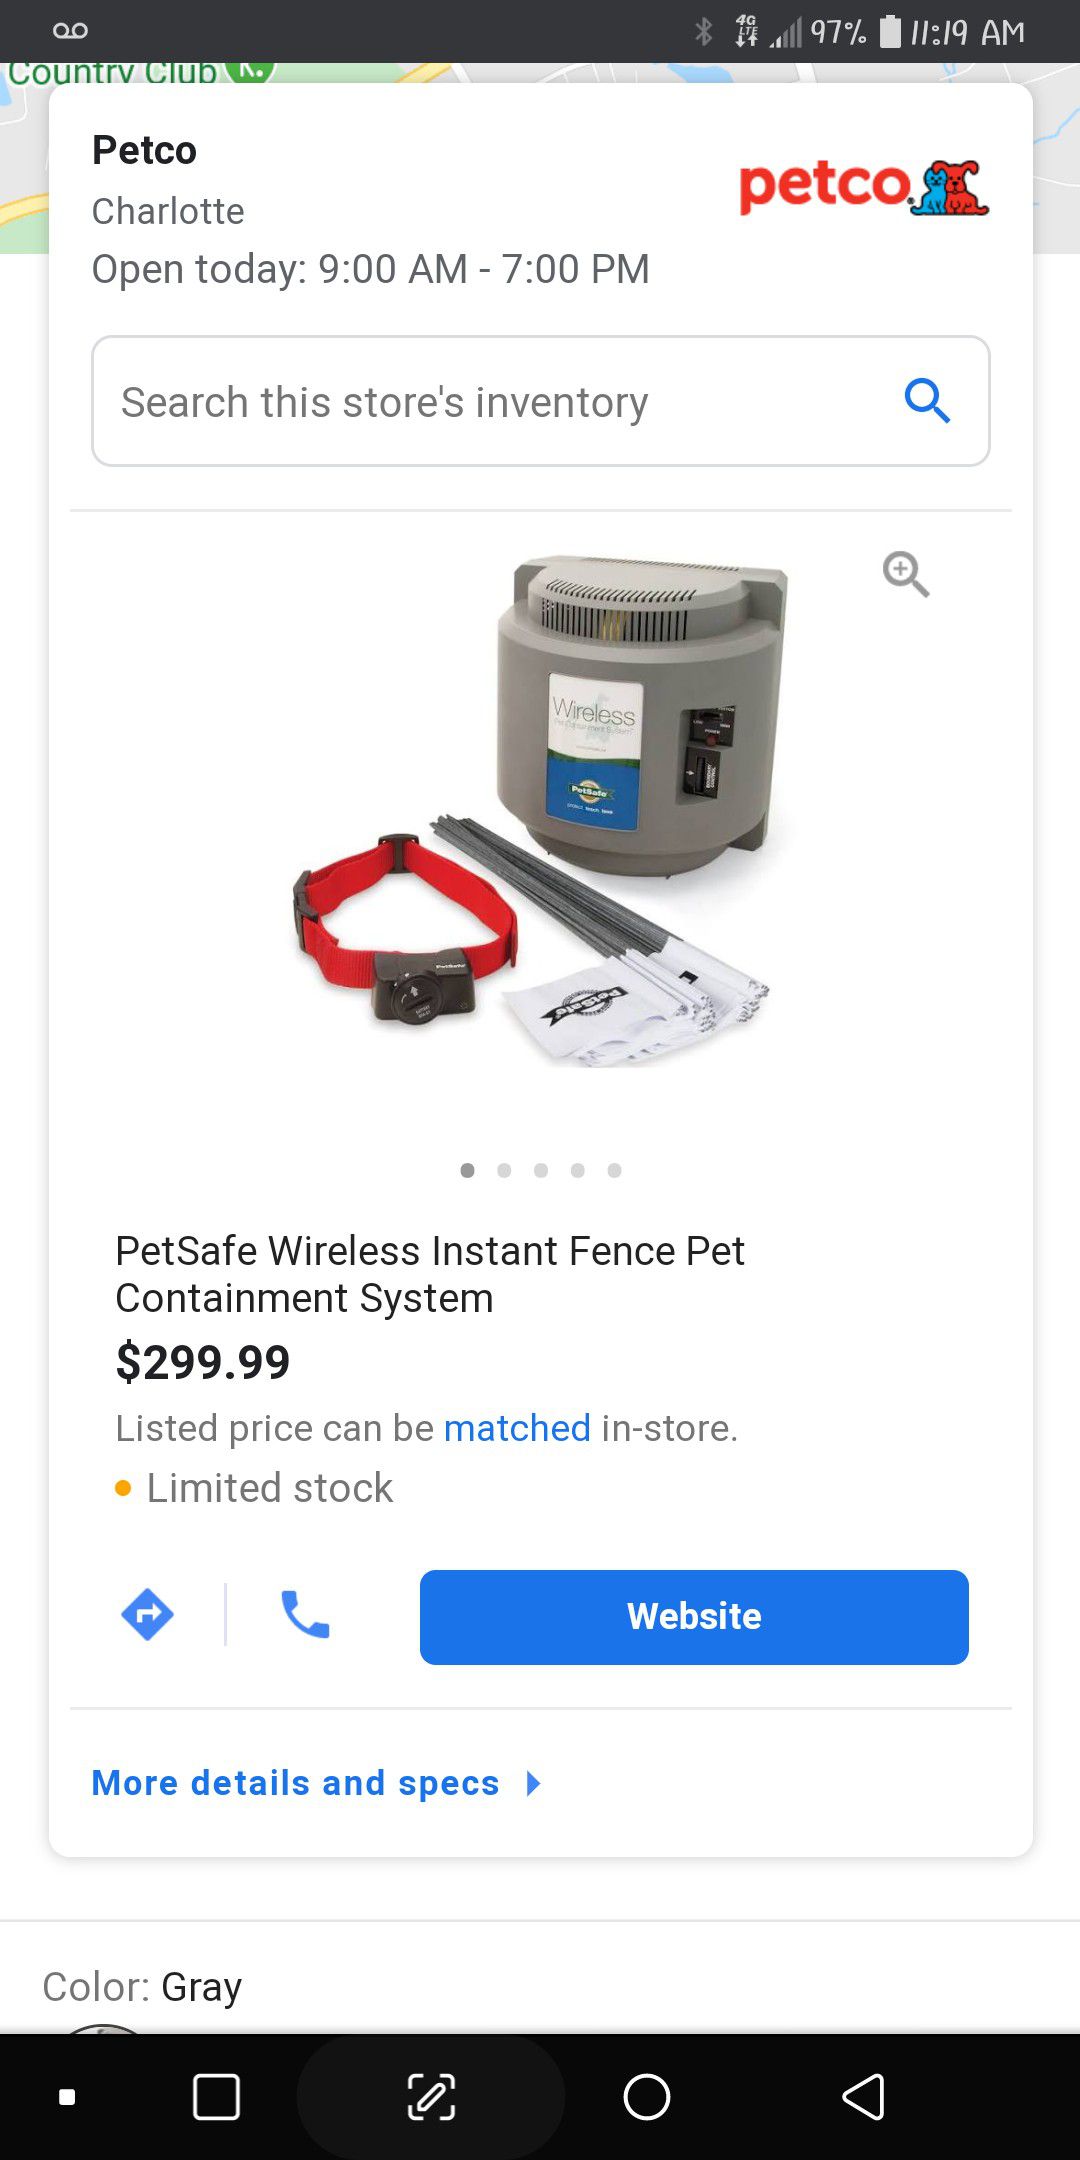 Petsafe wireless pet containment system